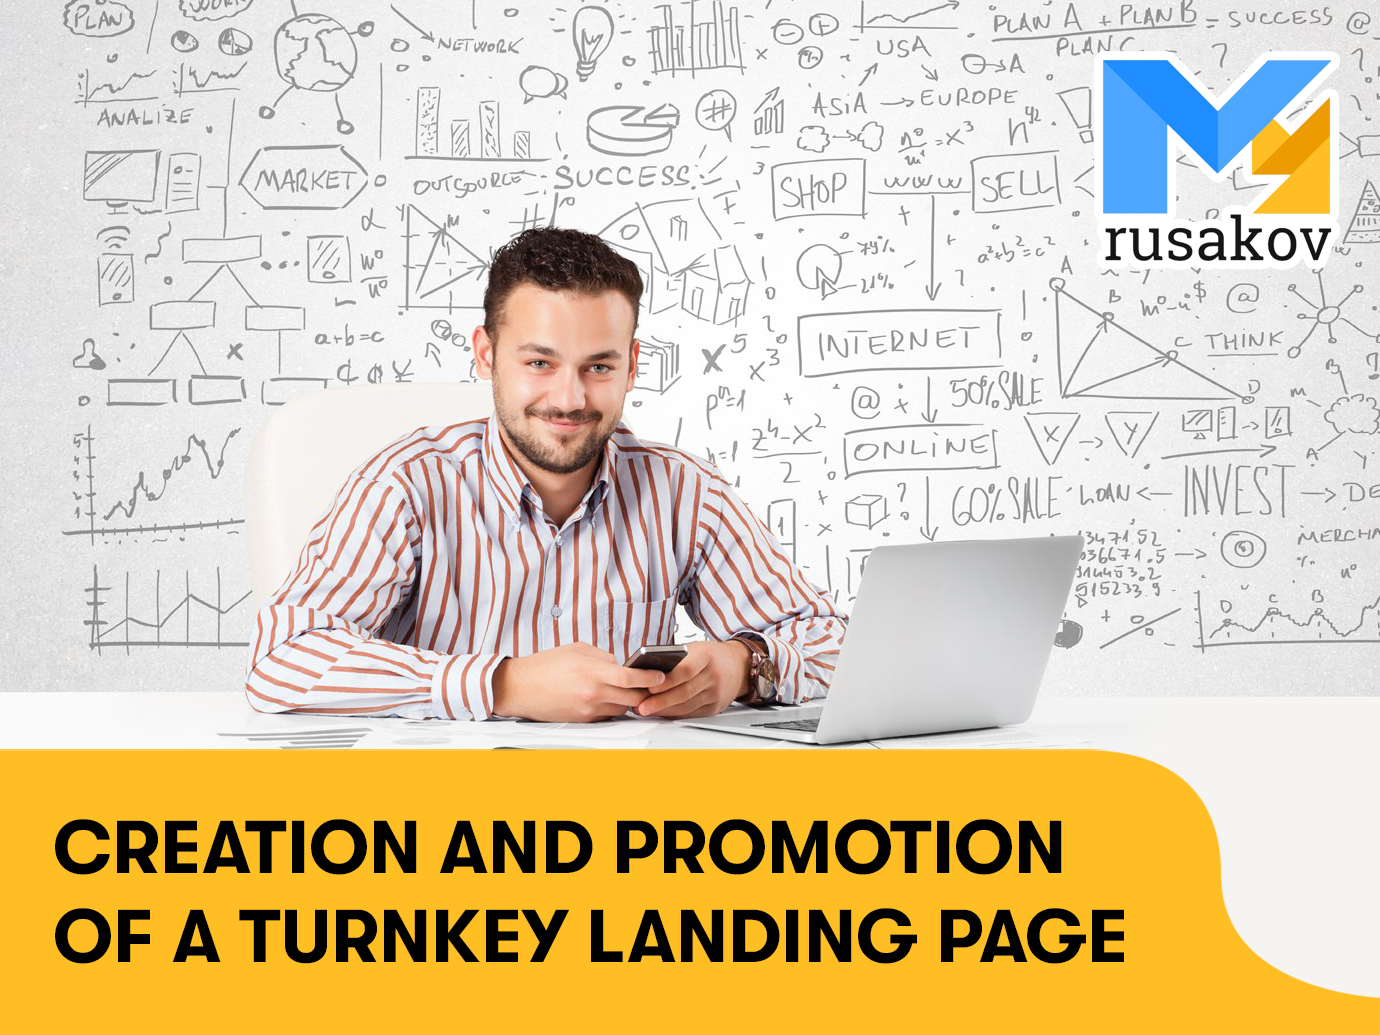 Creation and promotion of a turnkey landing page